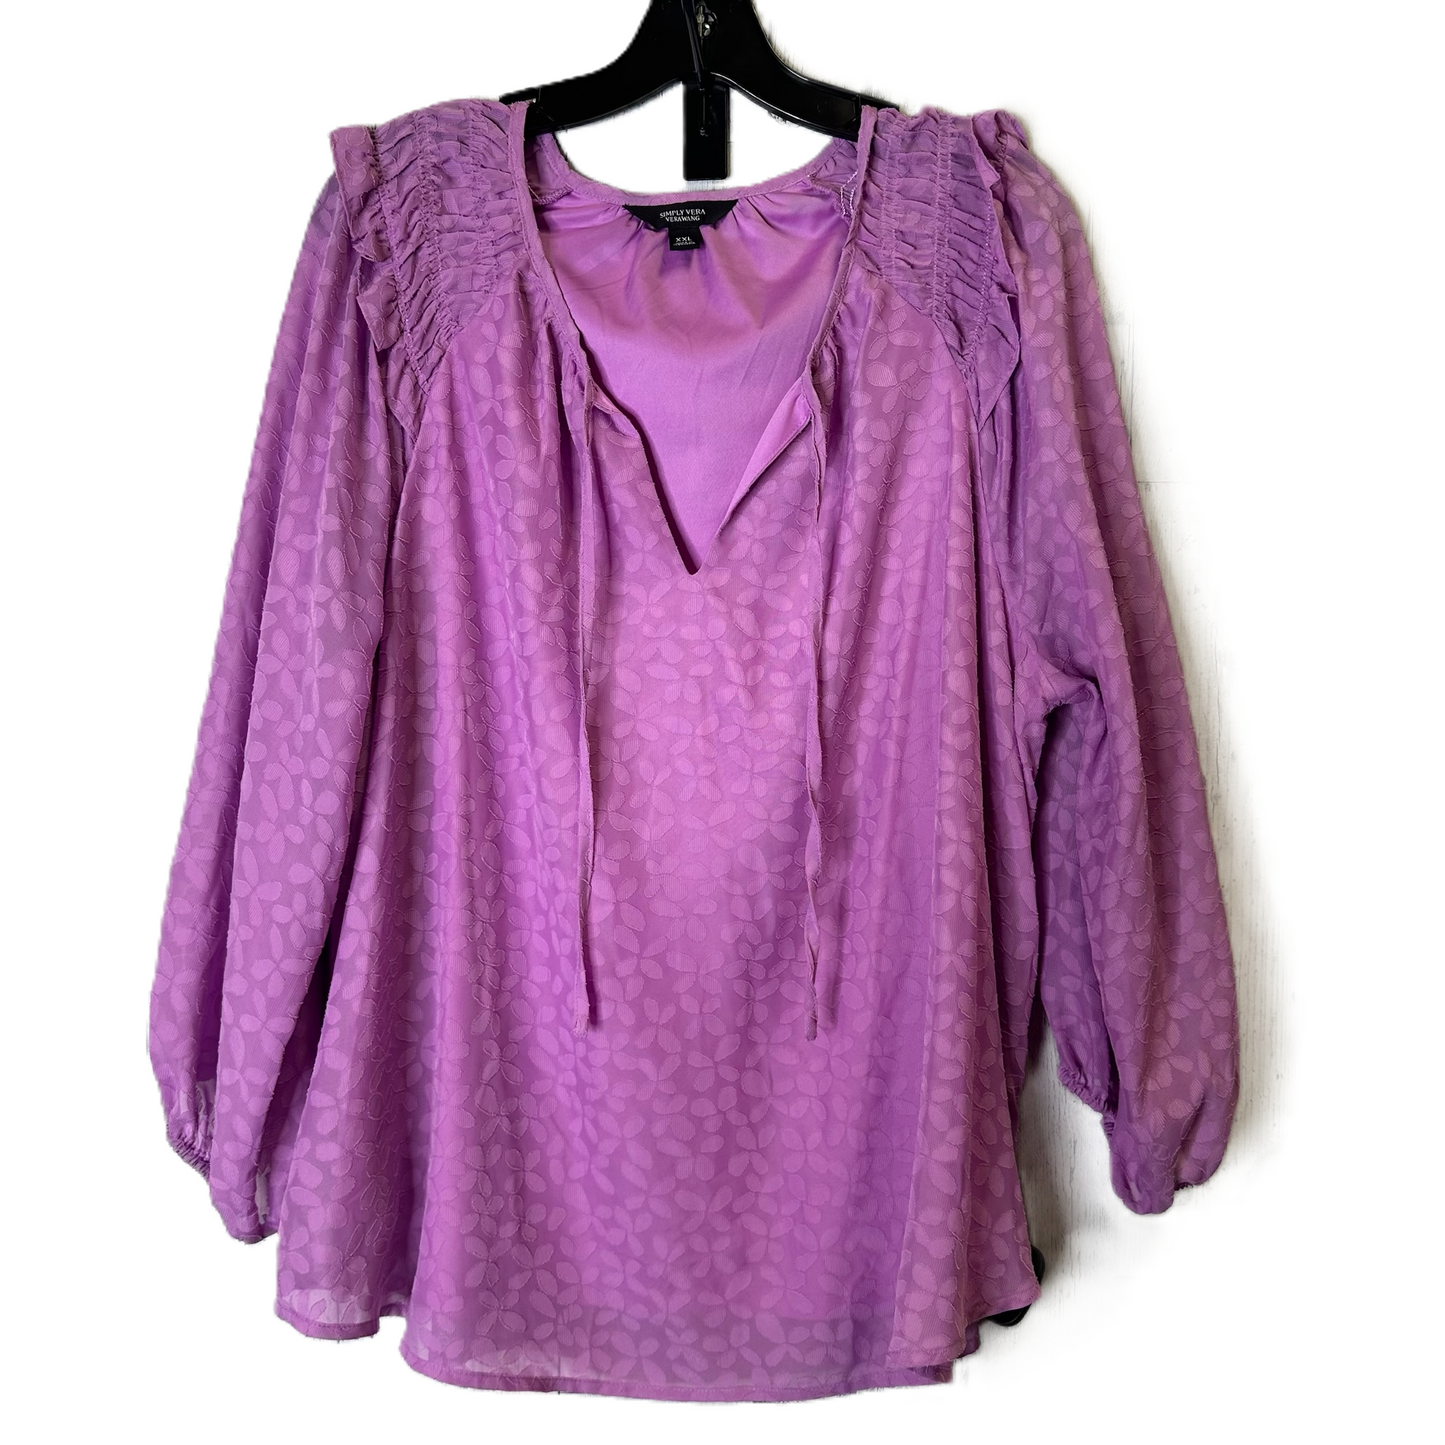 Purple Top Long Sleeve By Simply Vera, Size: Xxl